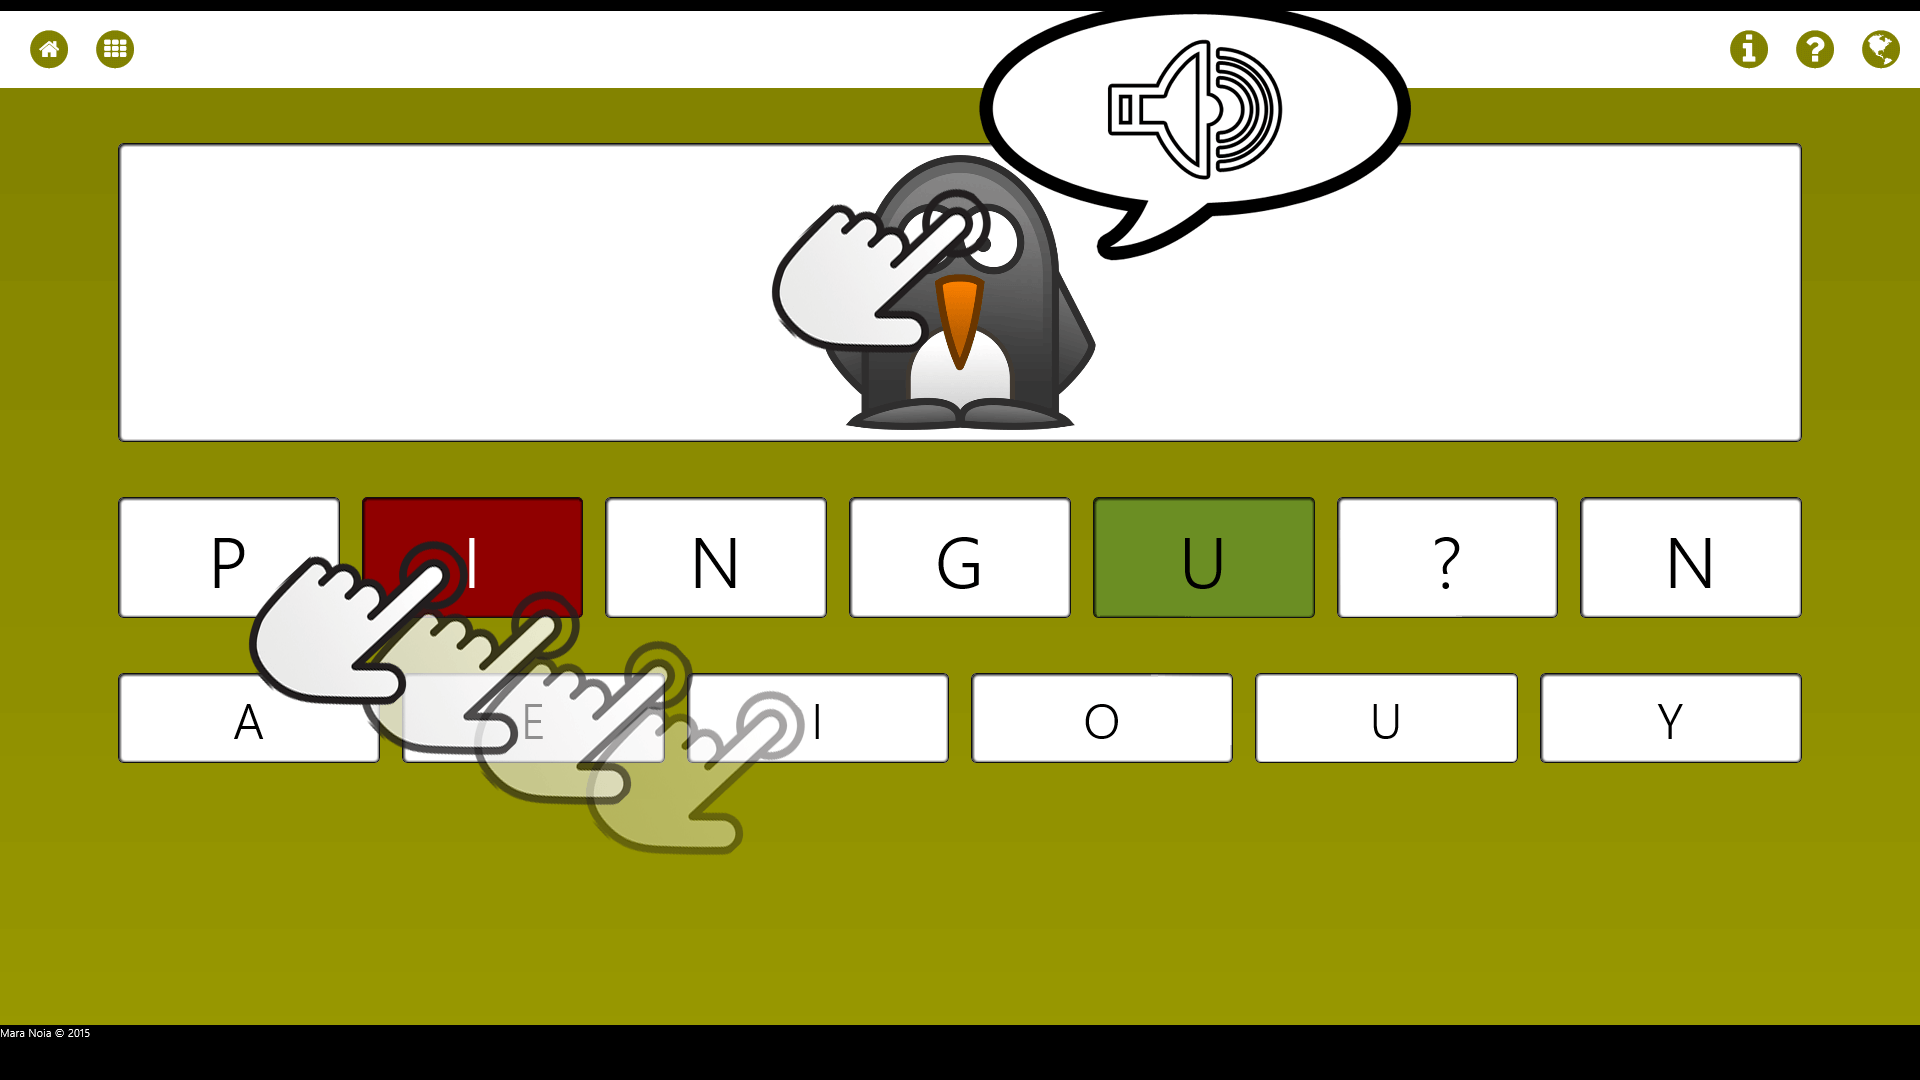 In Pictura Spelling drag the correct vowel to the correct place to form the word. If you need help you can tap the image to get the right word read aloud.